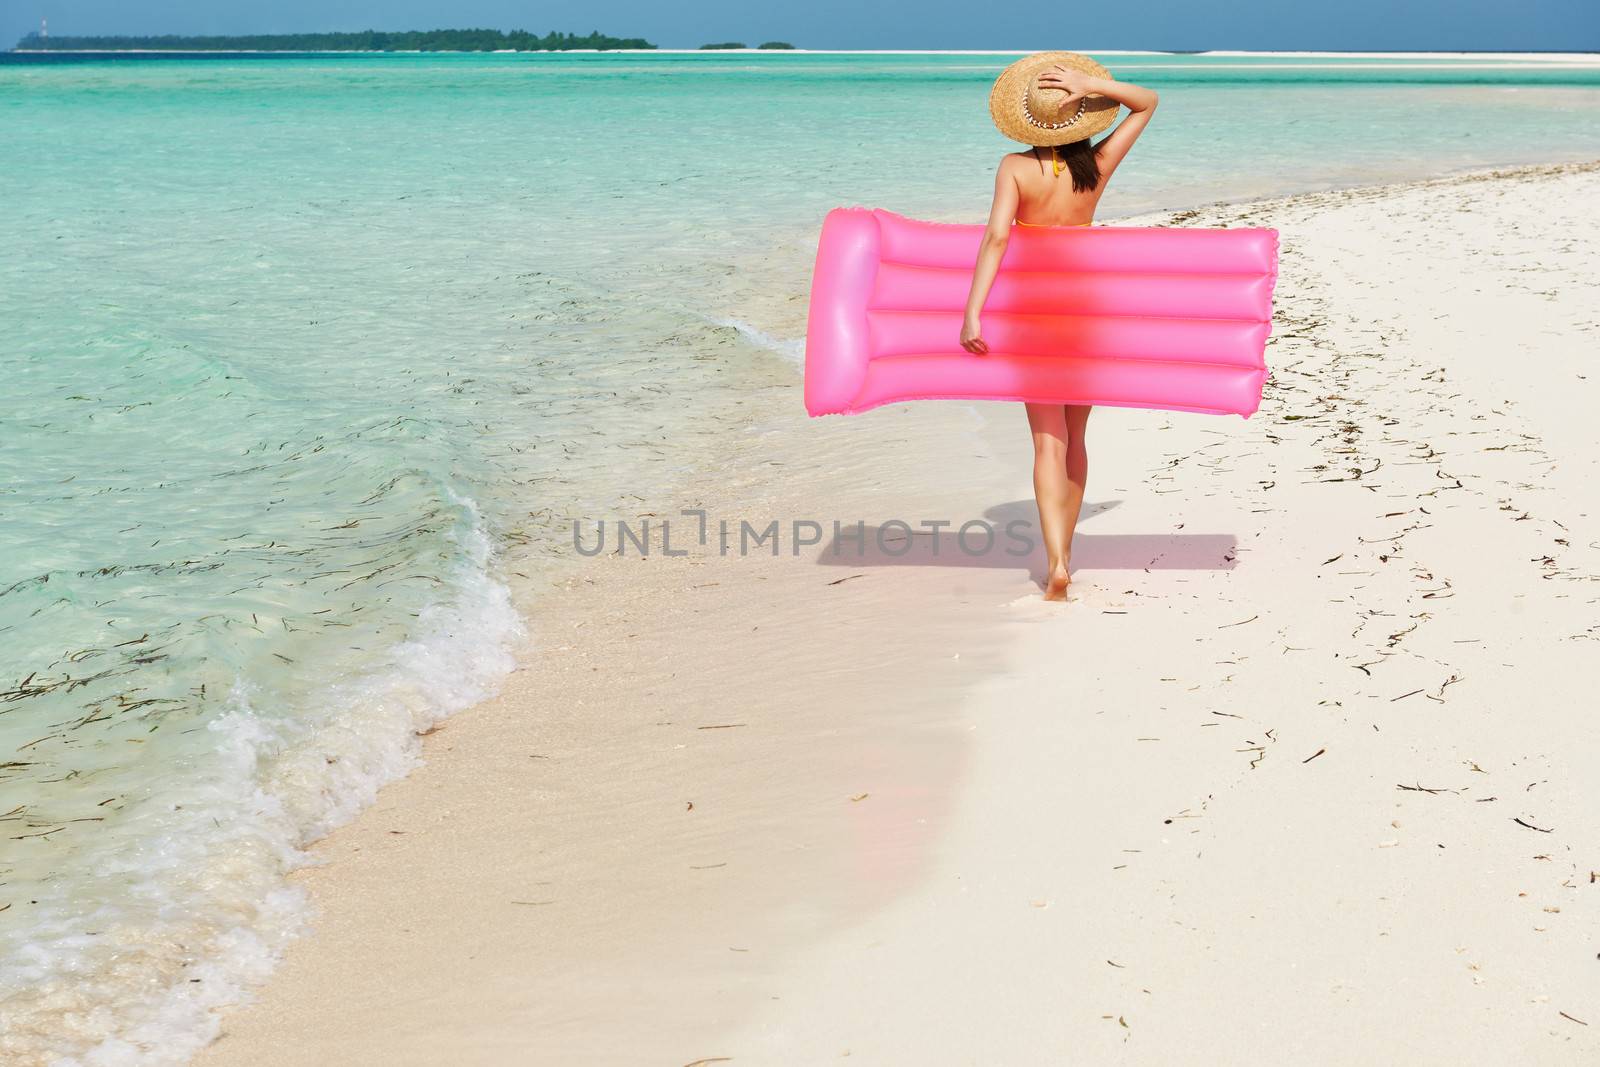 Woman with pink inflatable raft at the beach by haveseen